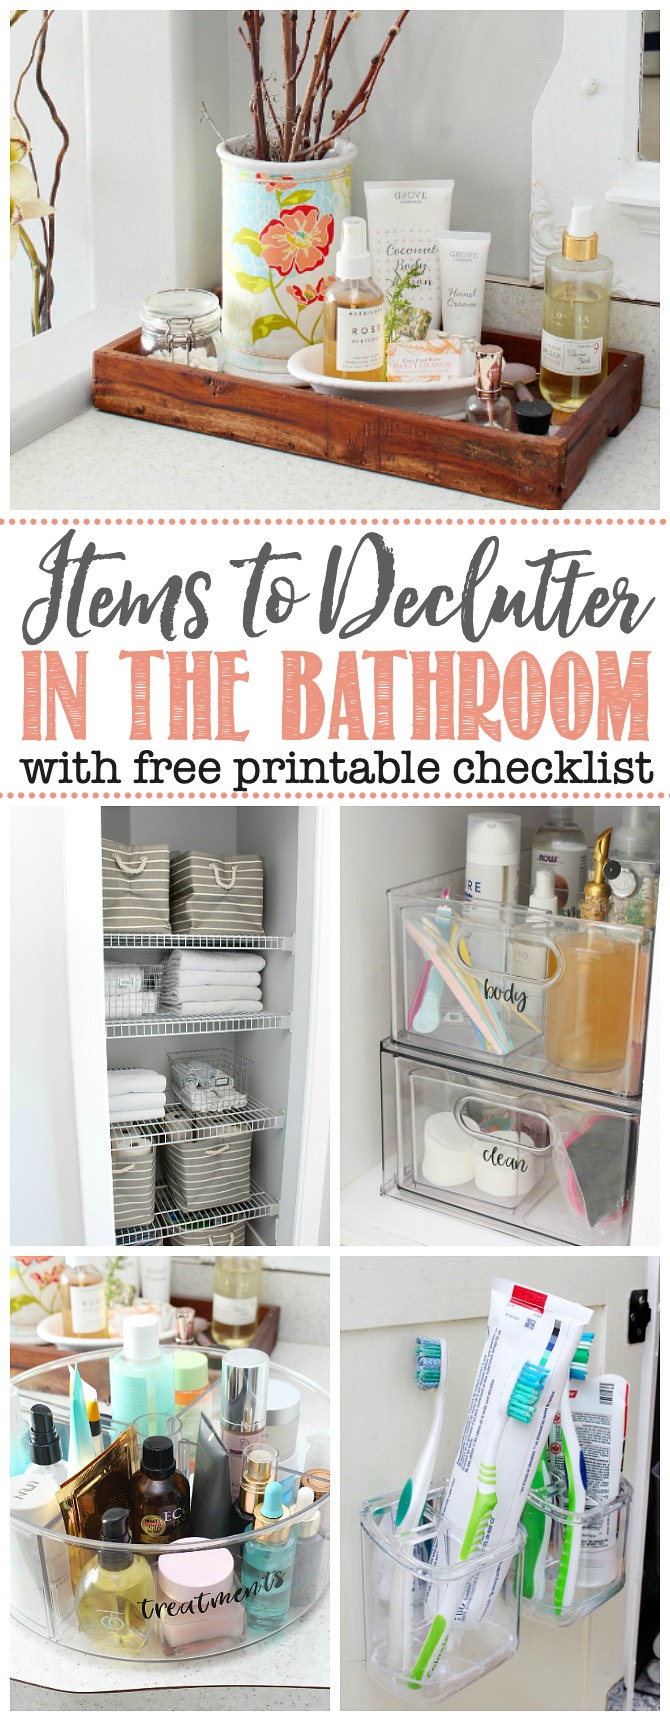 Items to Declutter from the Bathroom with a collage of organized bathroom spaces.